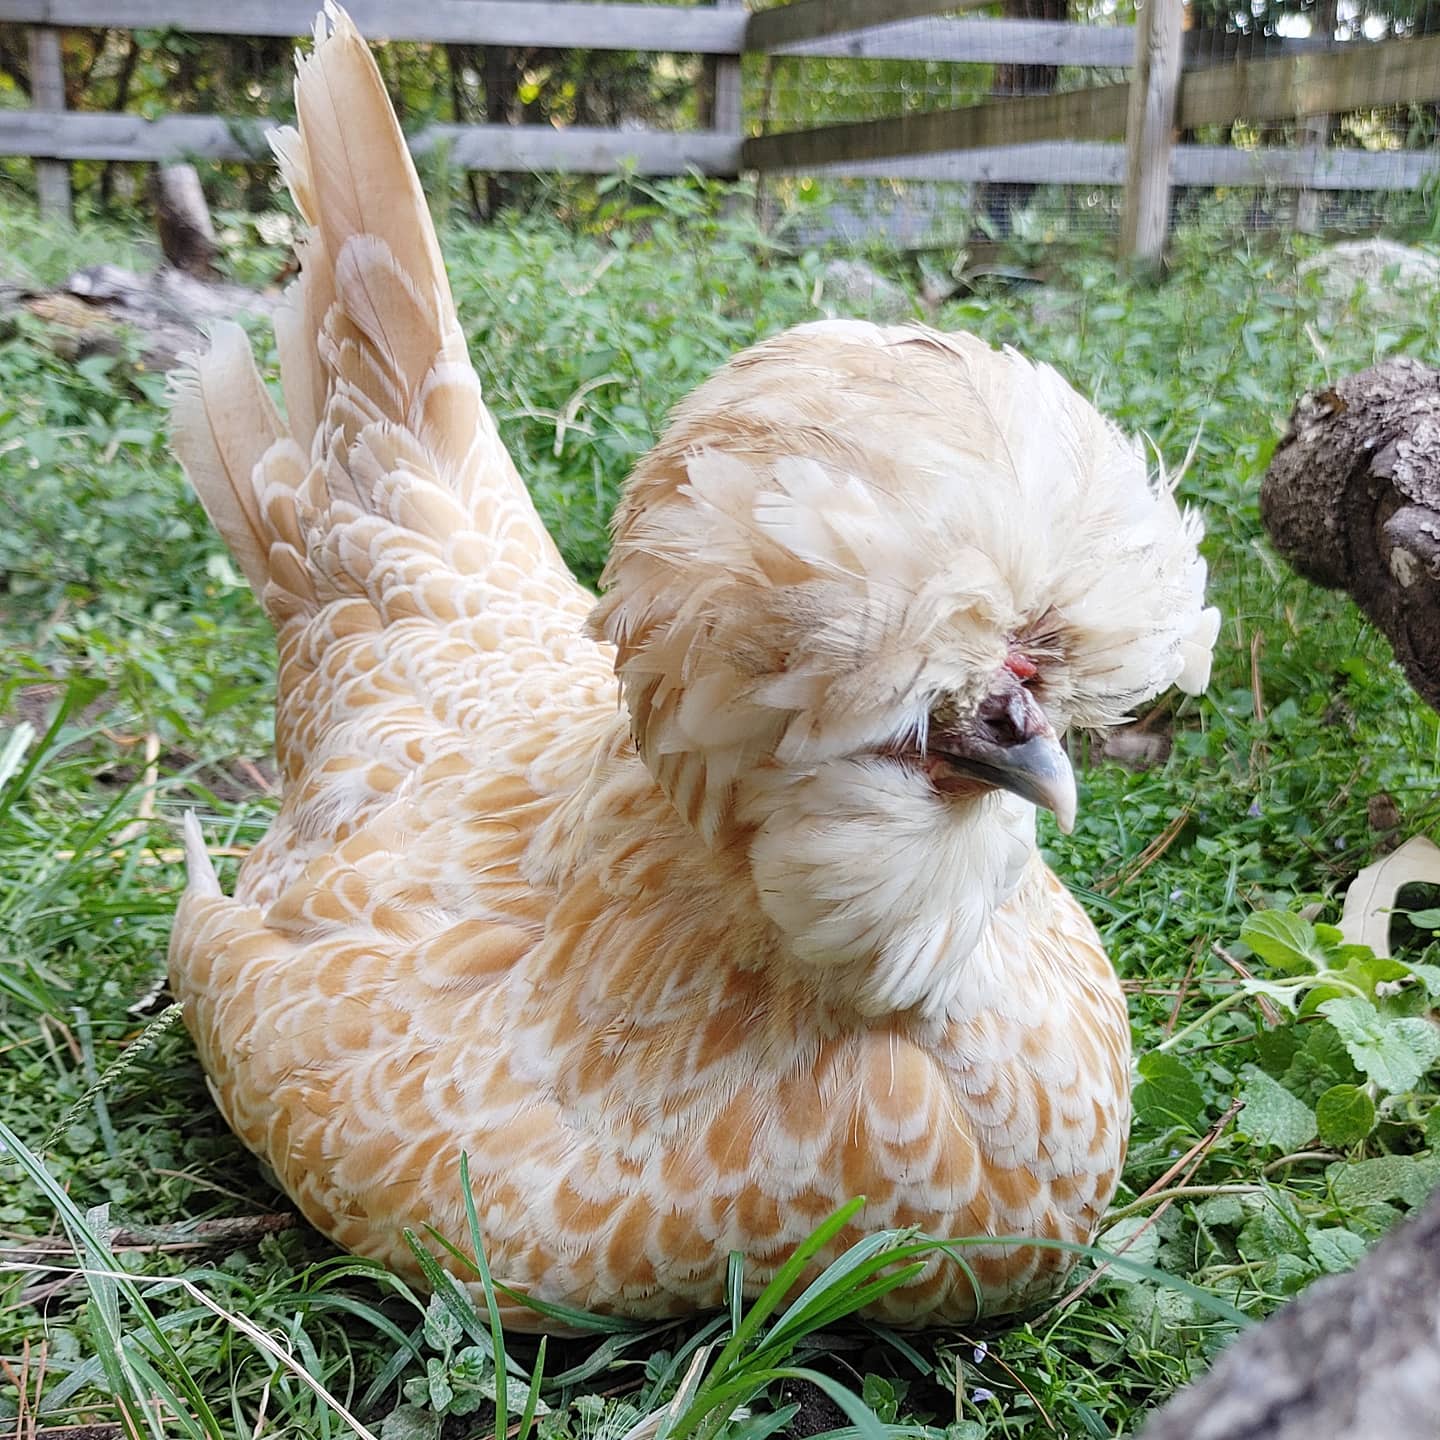 Most of my girls are busy! They will dig, forage, explore and generally cause havoc the entire time they are out free ranging. But not Becky. She has about 90 minutes in her and then she needs a nap. I guess when you look this good beauty rest is a top priority.